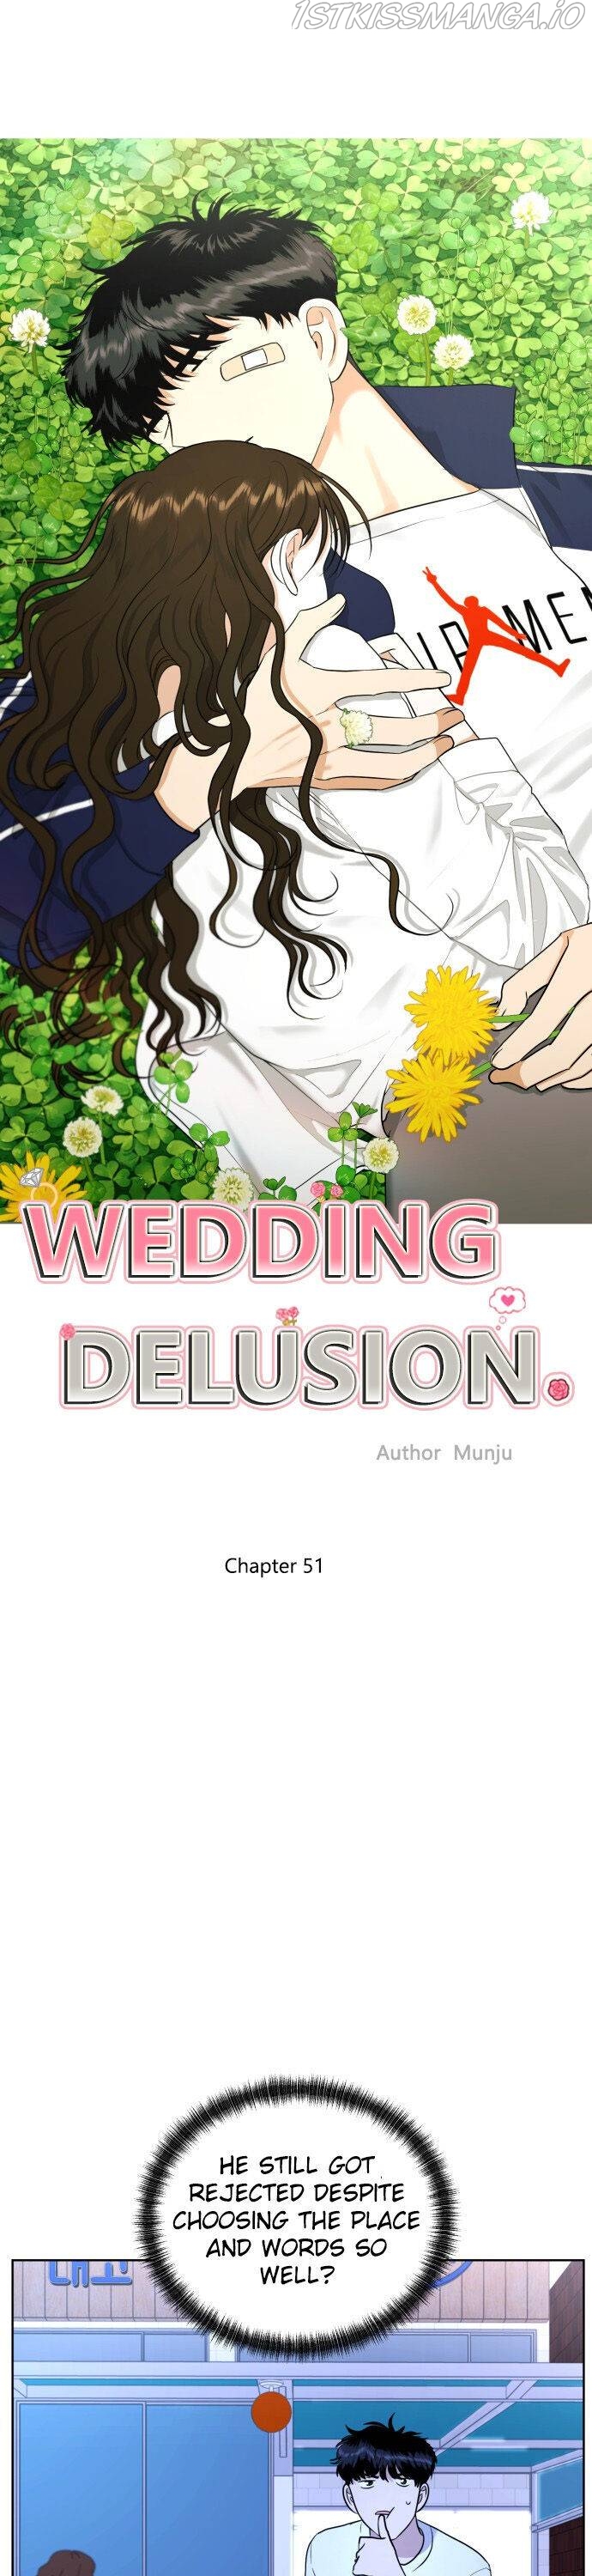 Wedding Delusion Chapter 51 - Page 0